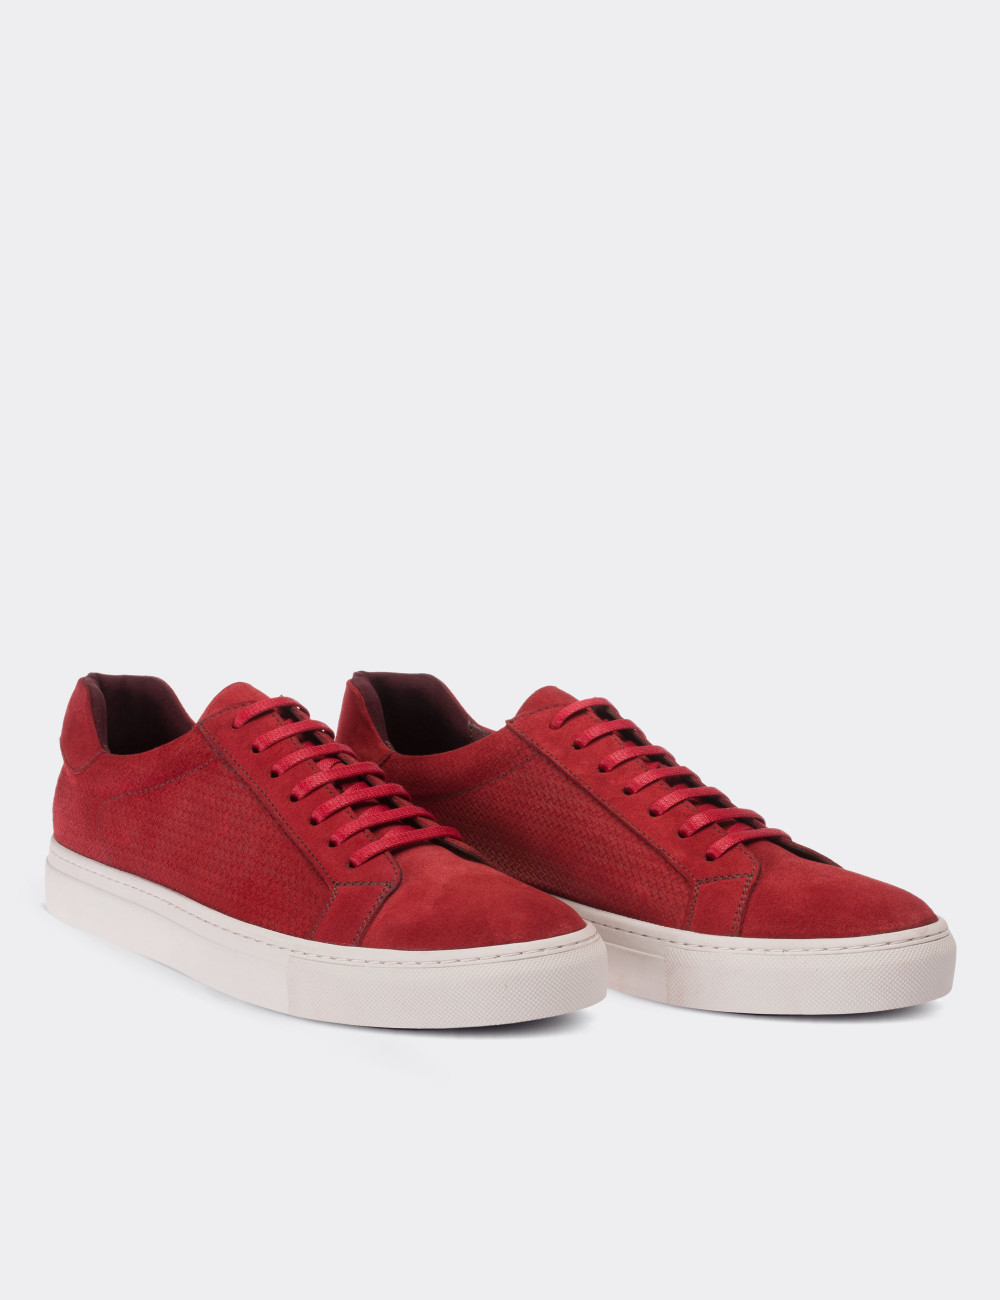 Red Suede Leather Sneakers - 01681MKRMC01